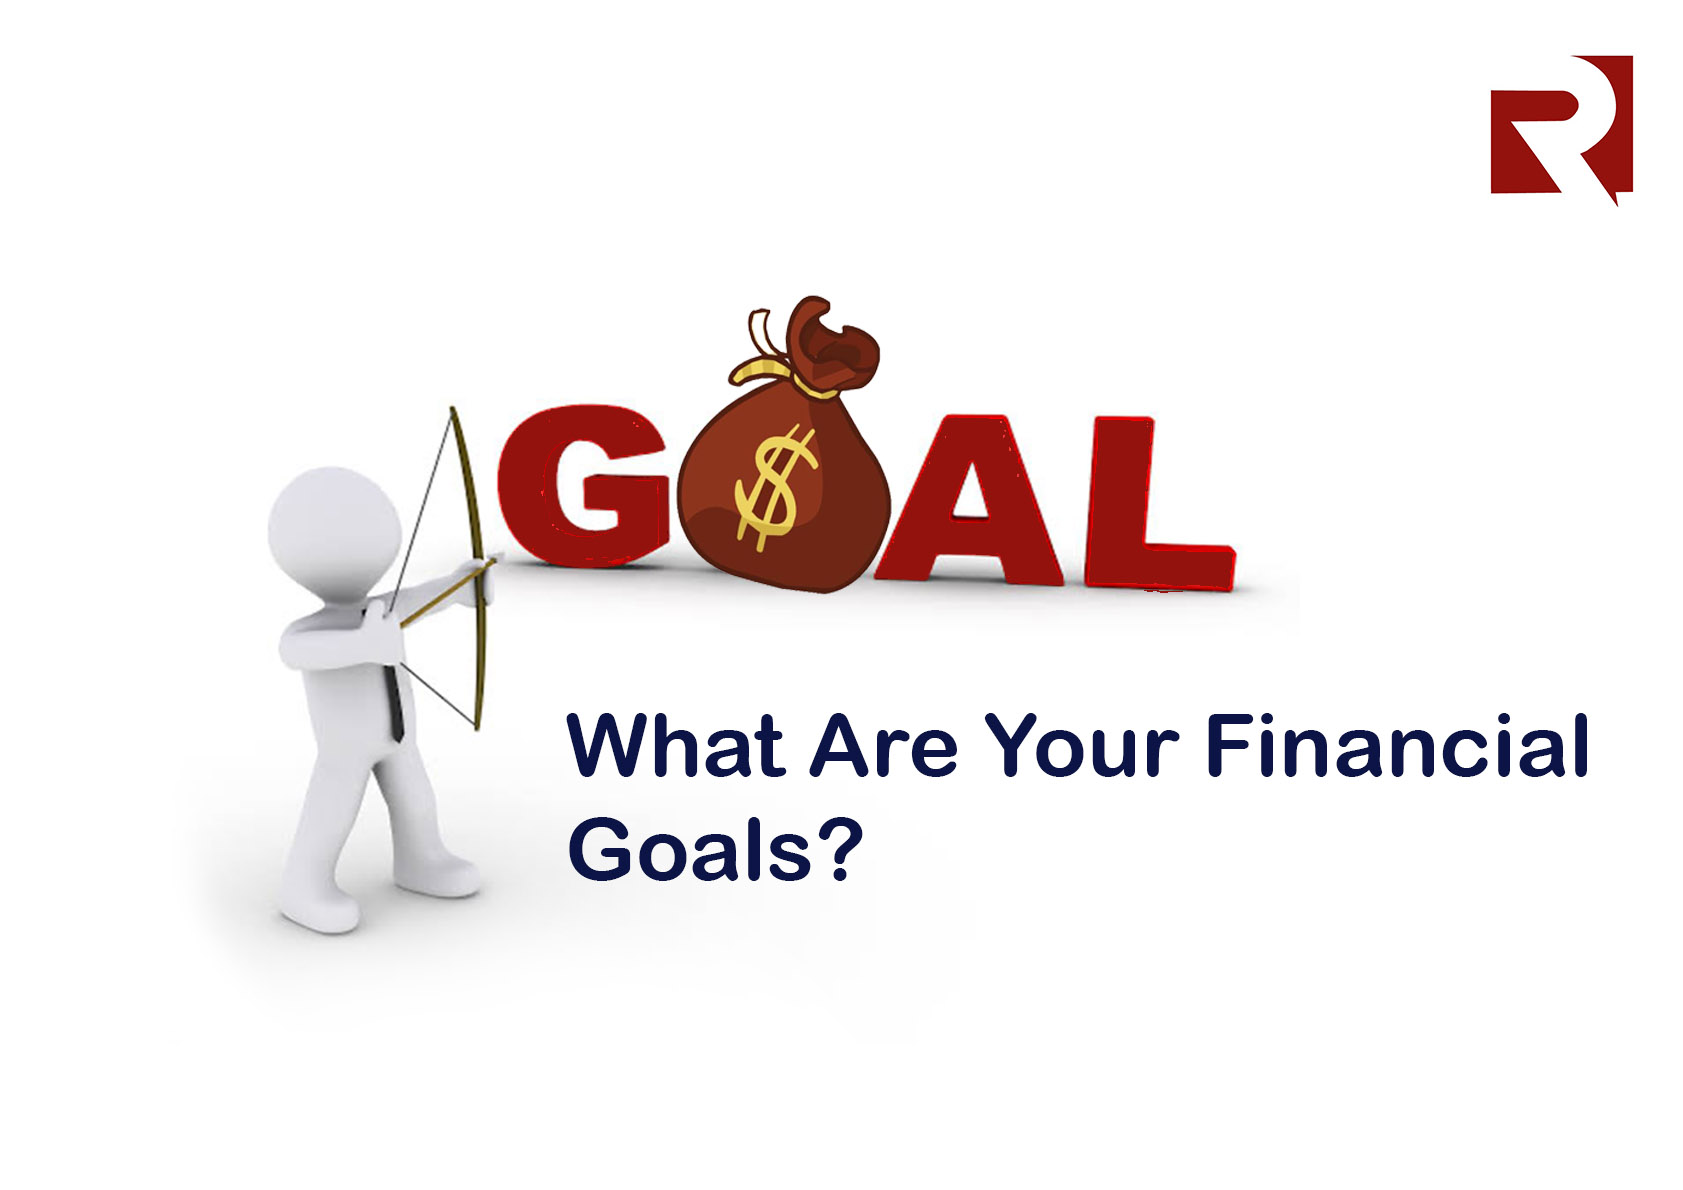 What Are Your Financial Goals?